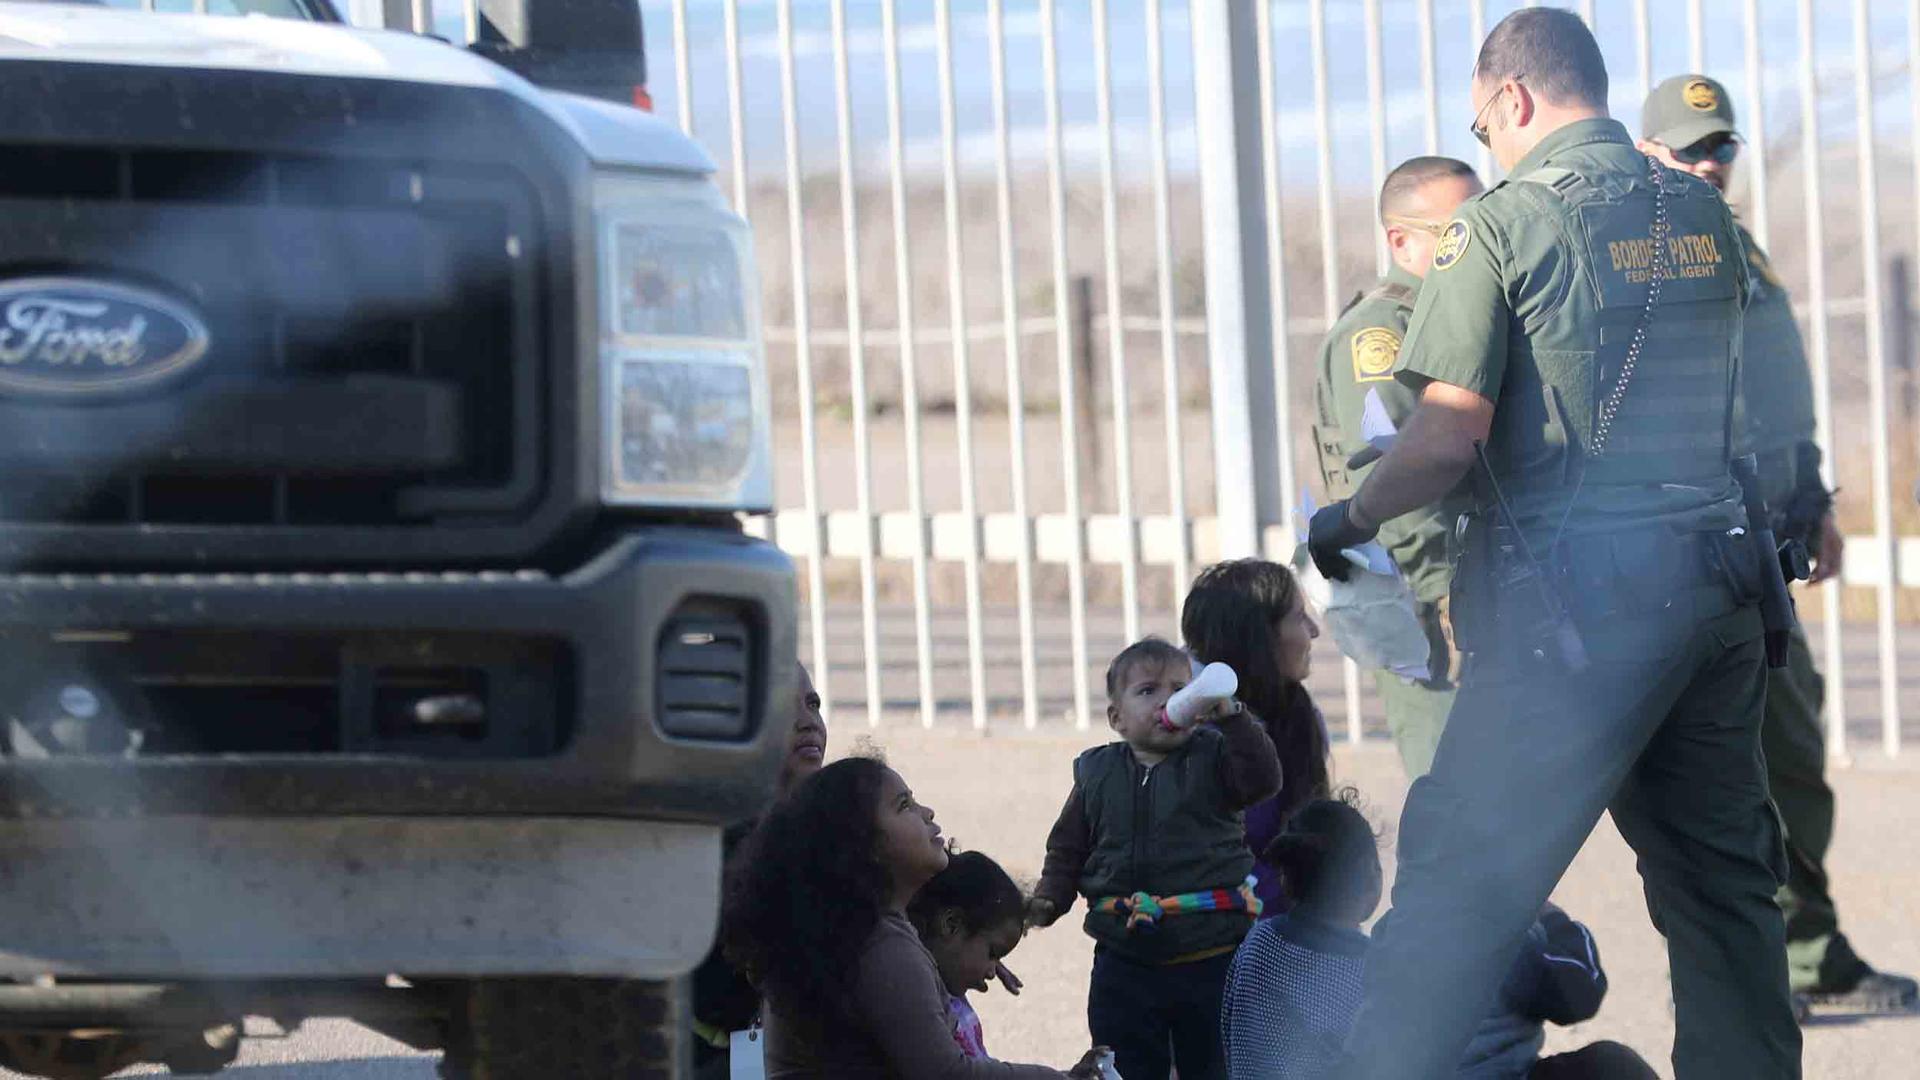 A migrant woman and her children sit beside a truck while three border patrol officers take them into custody